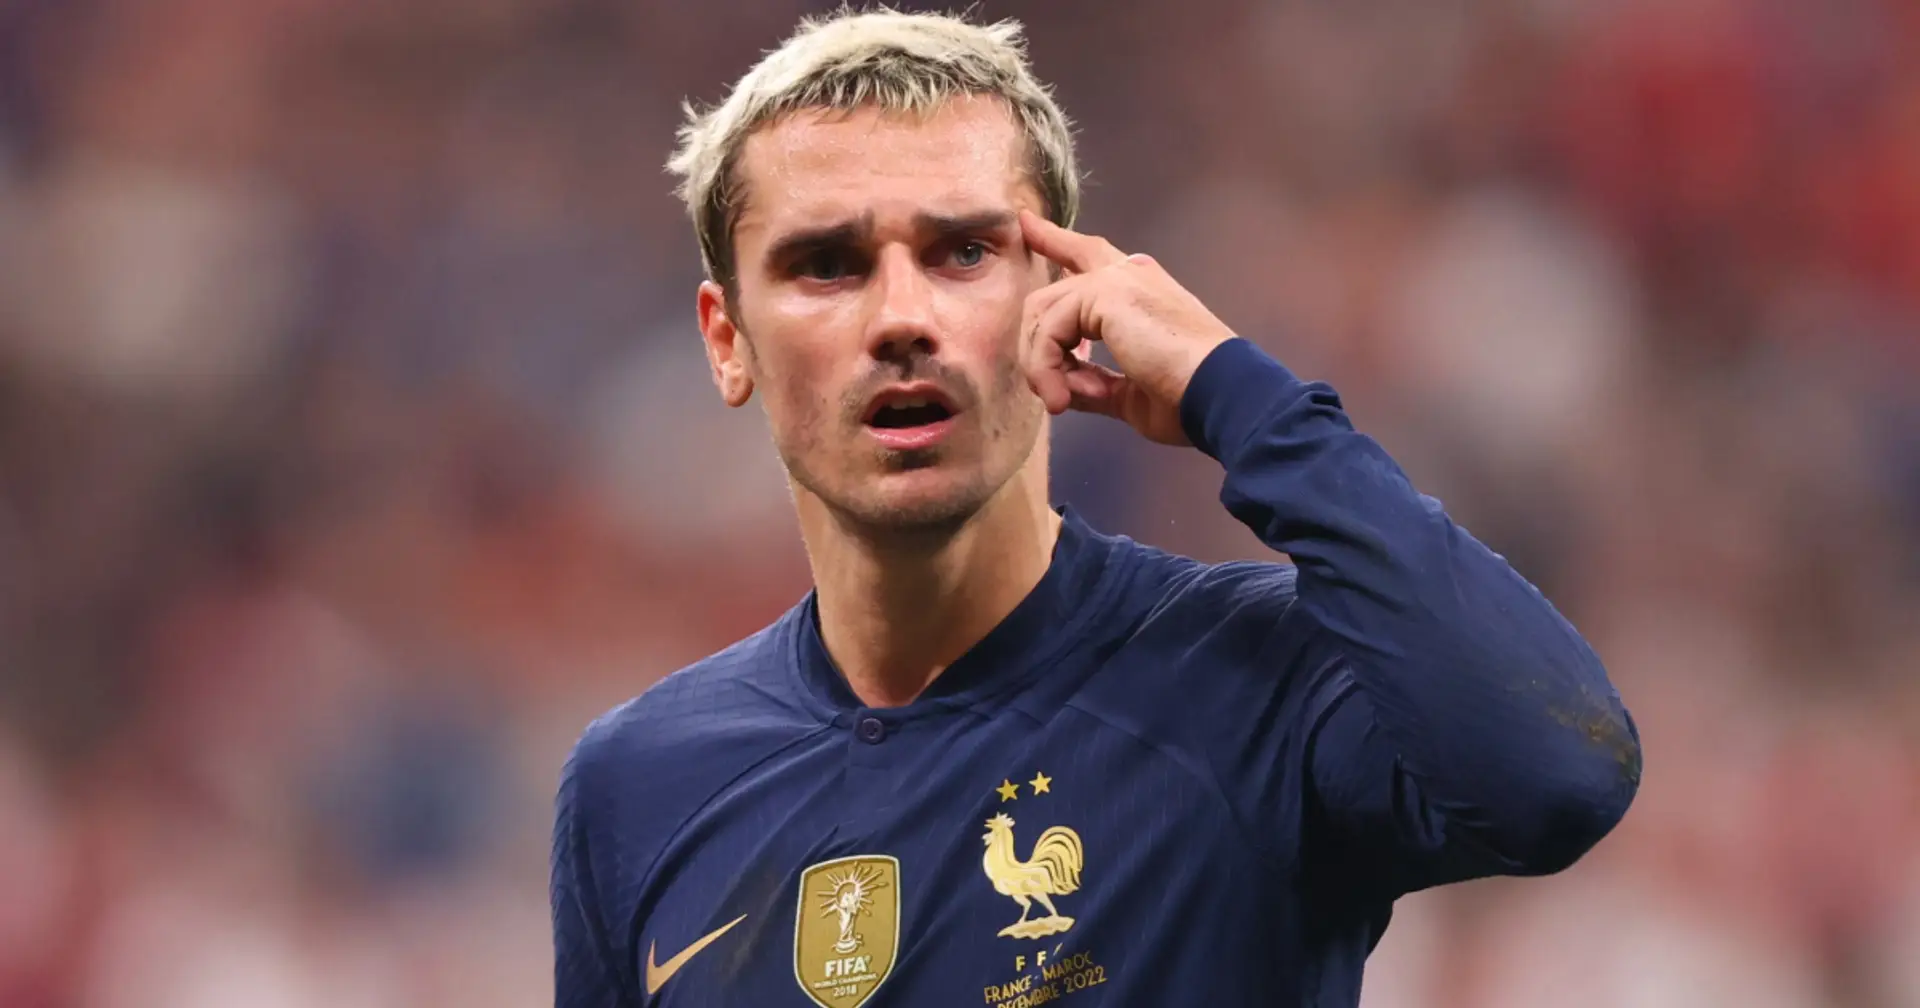 Antoine Griezmann holds a standout record in international football